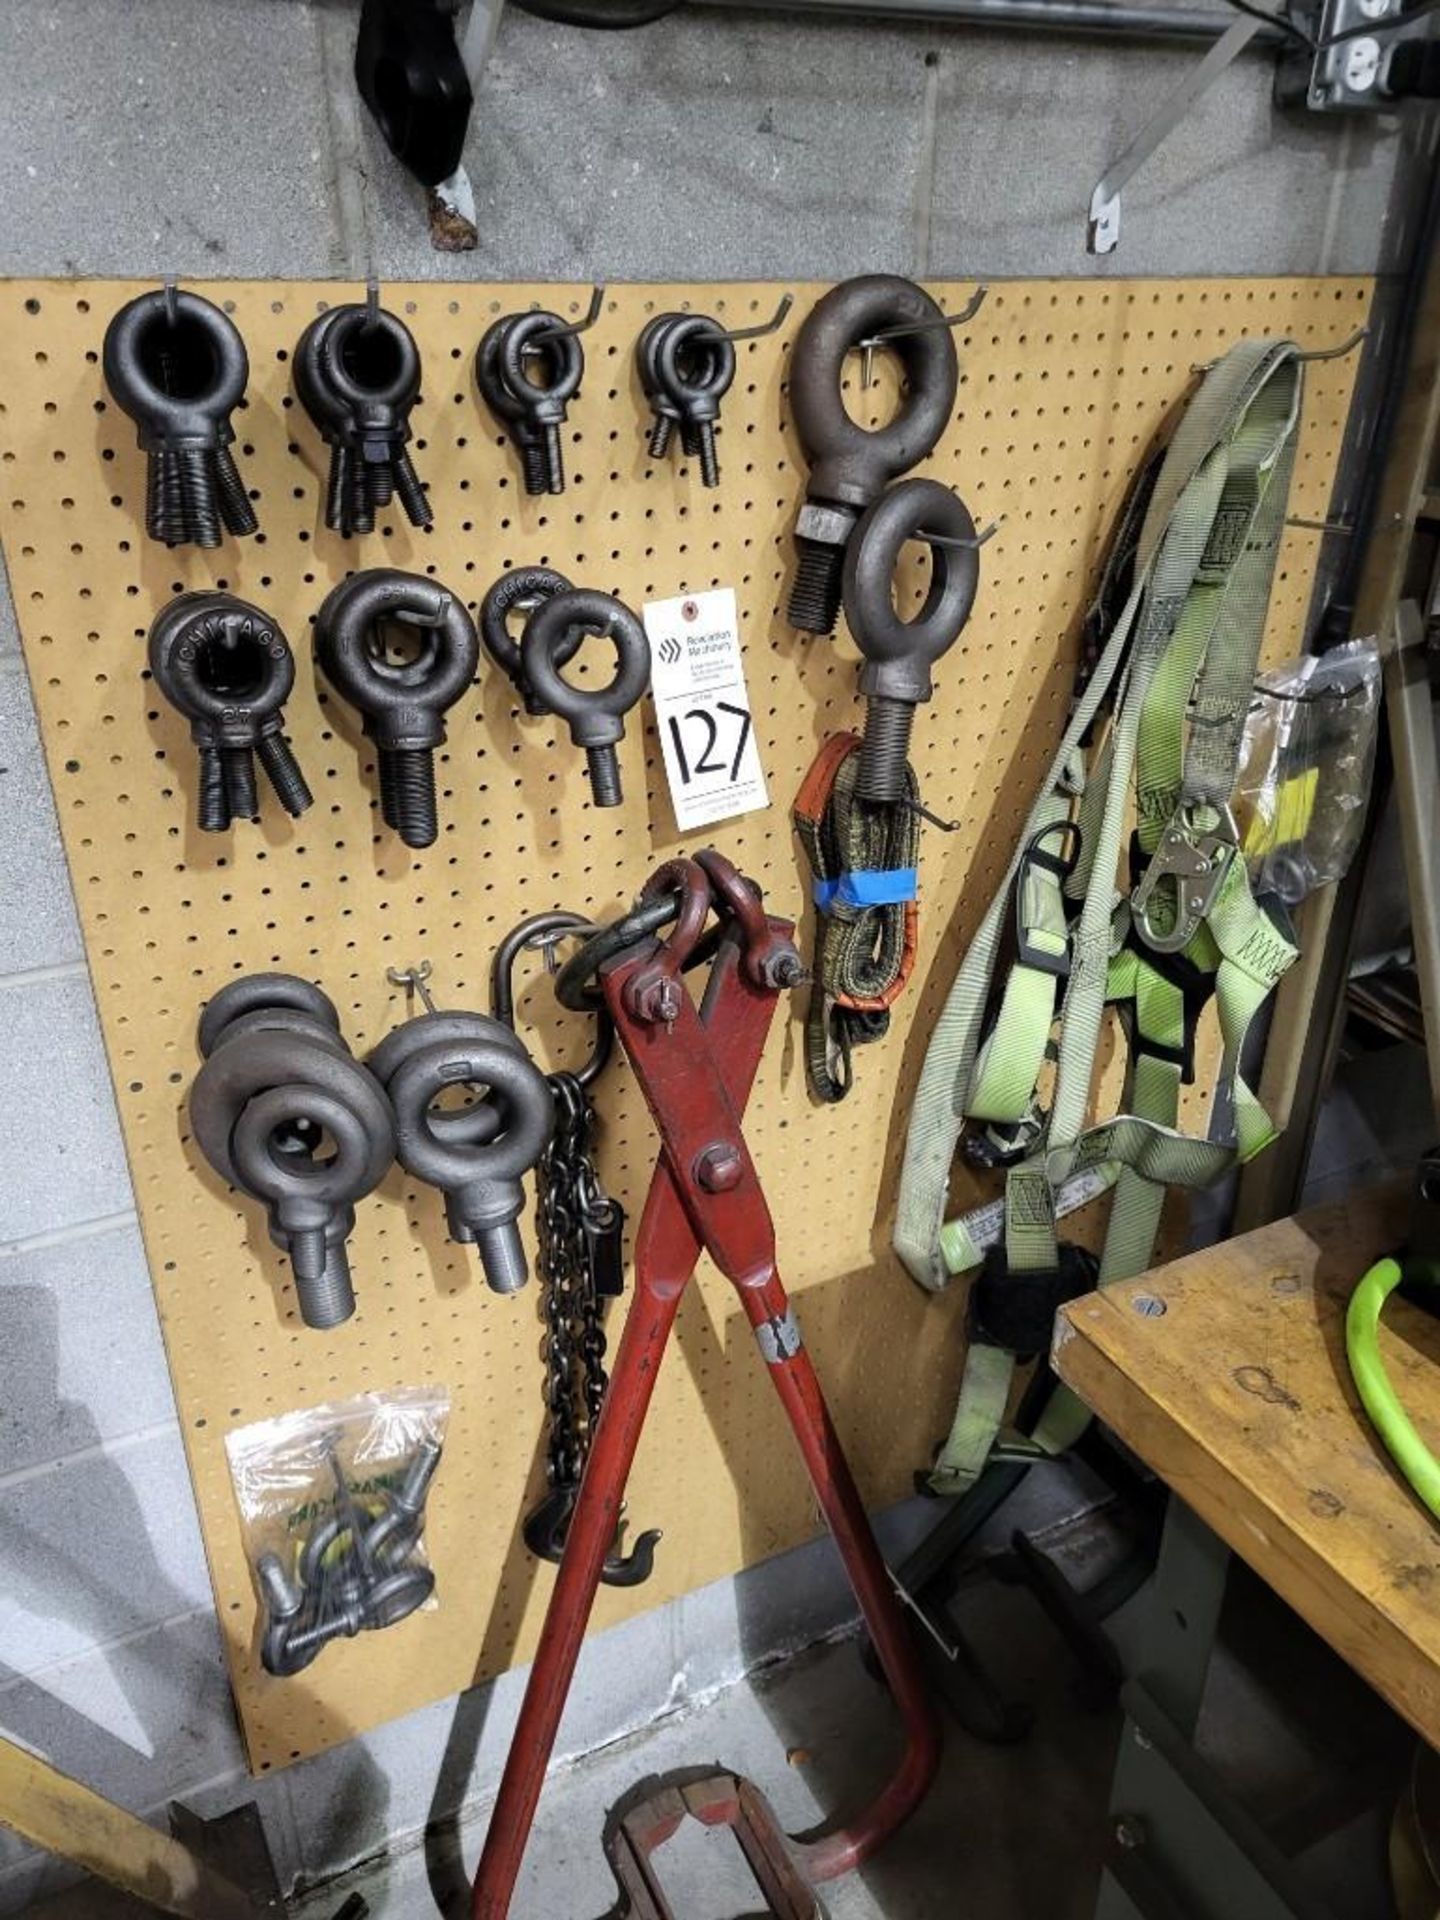 RIGGING SUPPLIES - EYE BOLTS, HARNESS, CHAINS, CLAMP